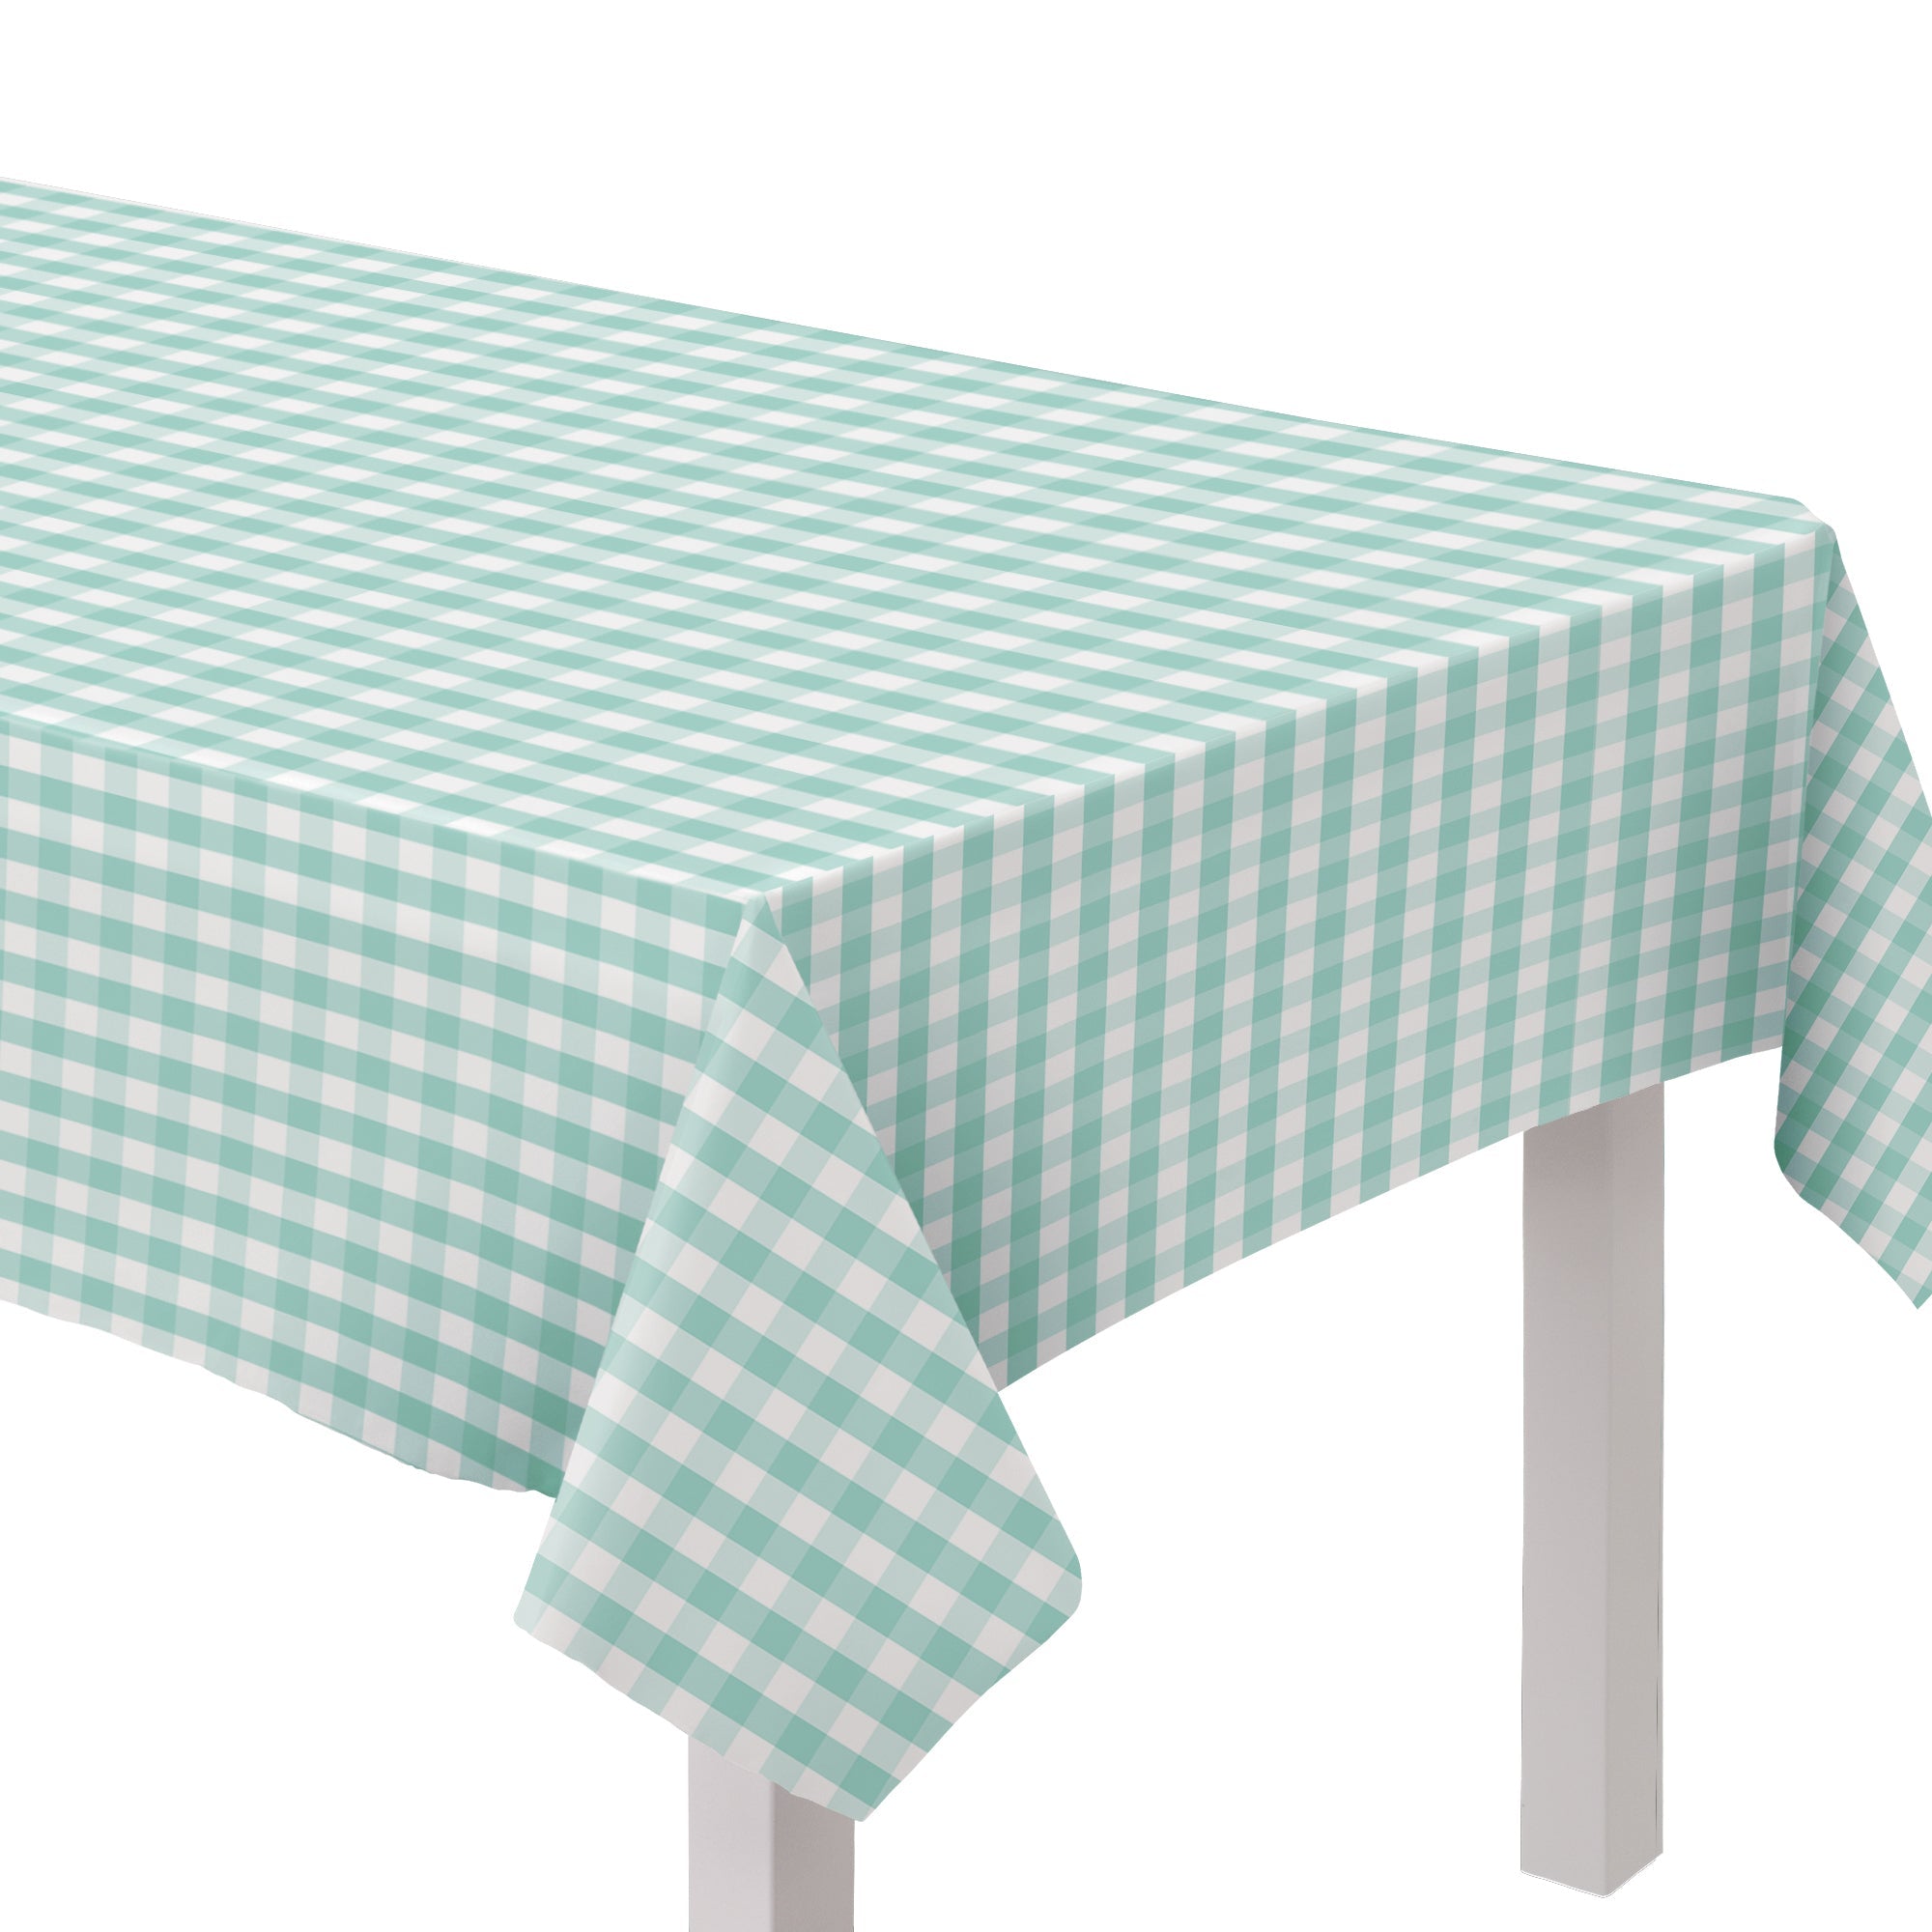 Teal Gingham Fabric 60" x 104" Table Cover